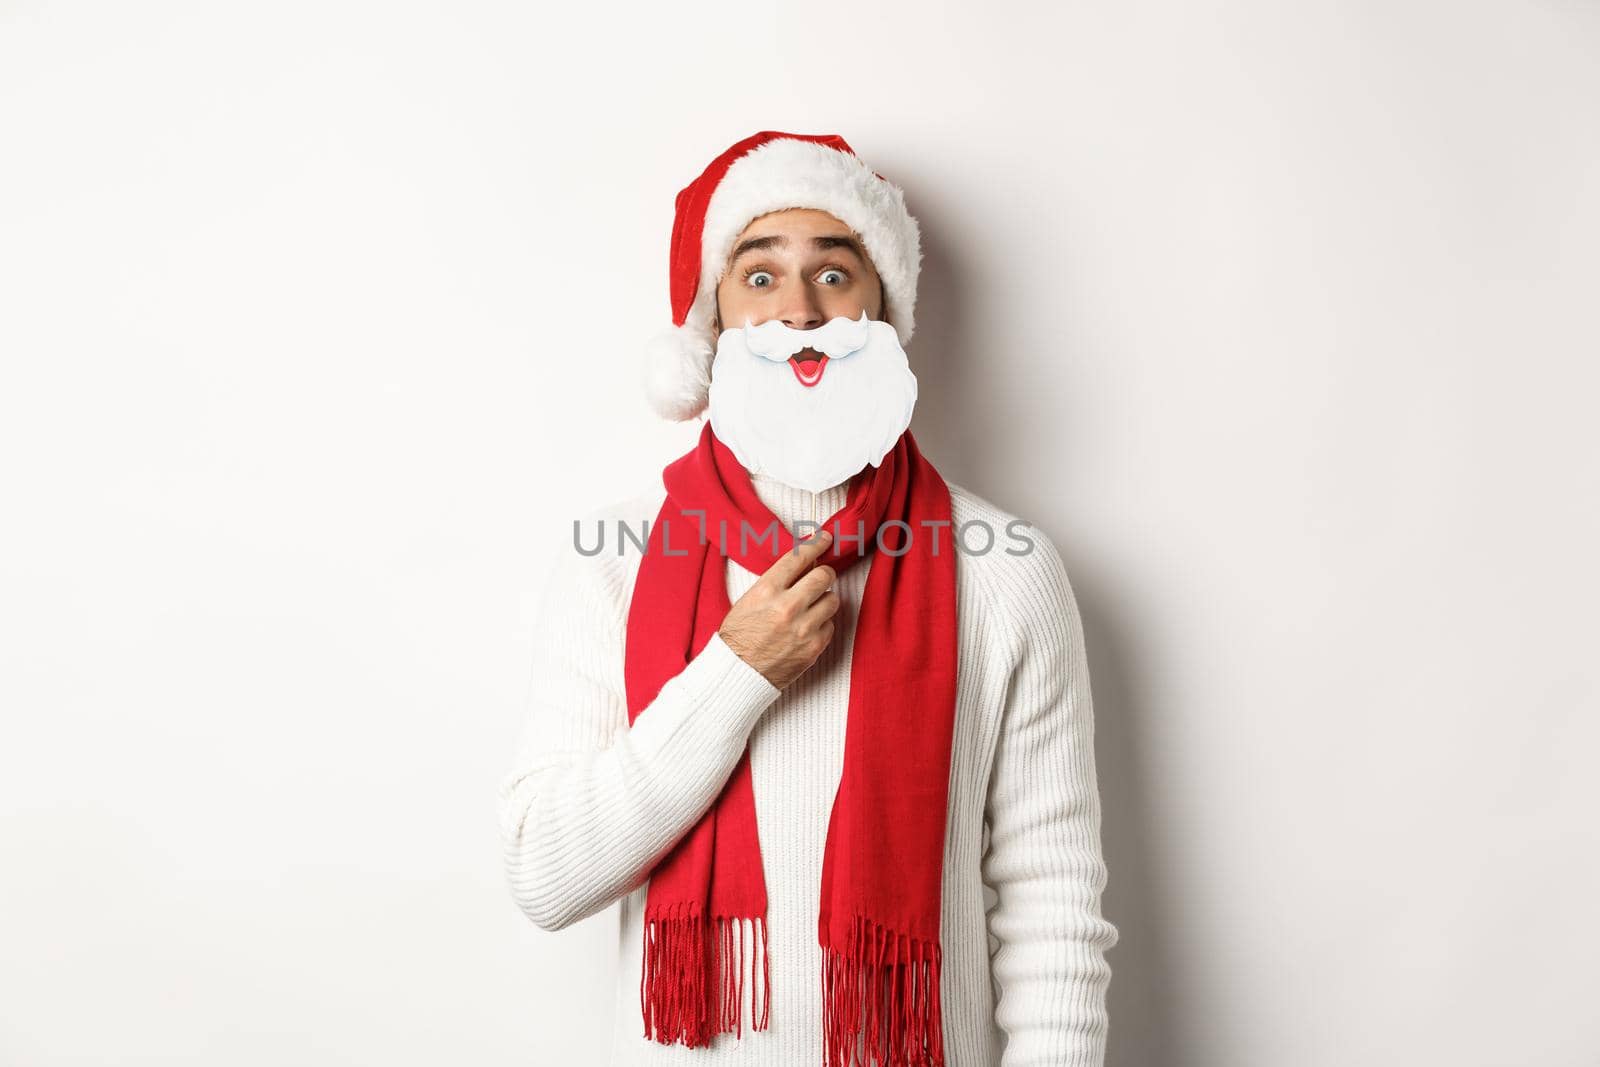 Christmas party and celebration concept. Funny young man in Santa hat holding white beard mask and making faces, enjoying New Year, white background.